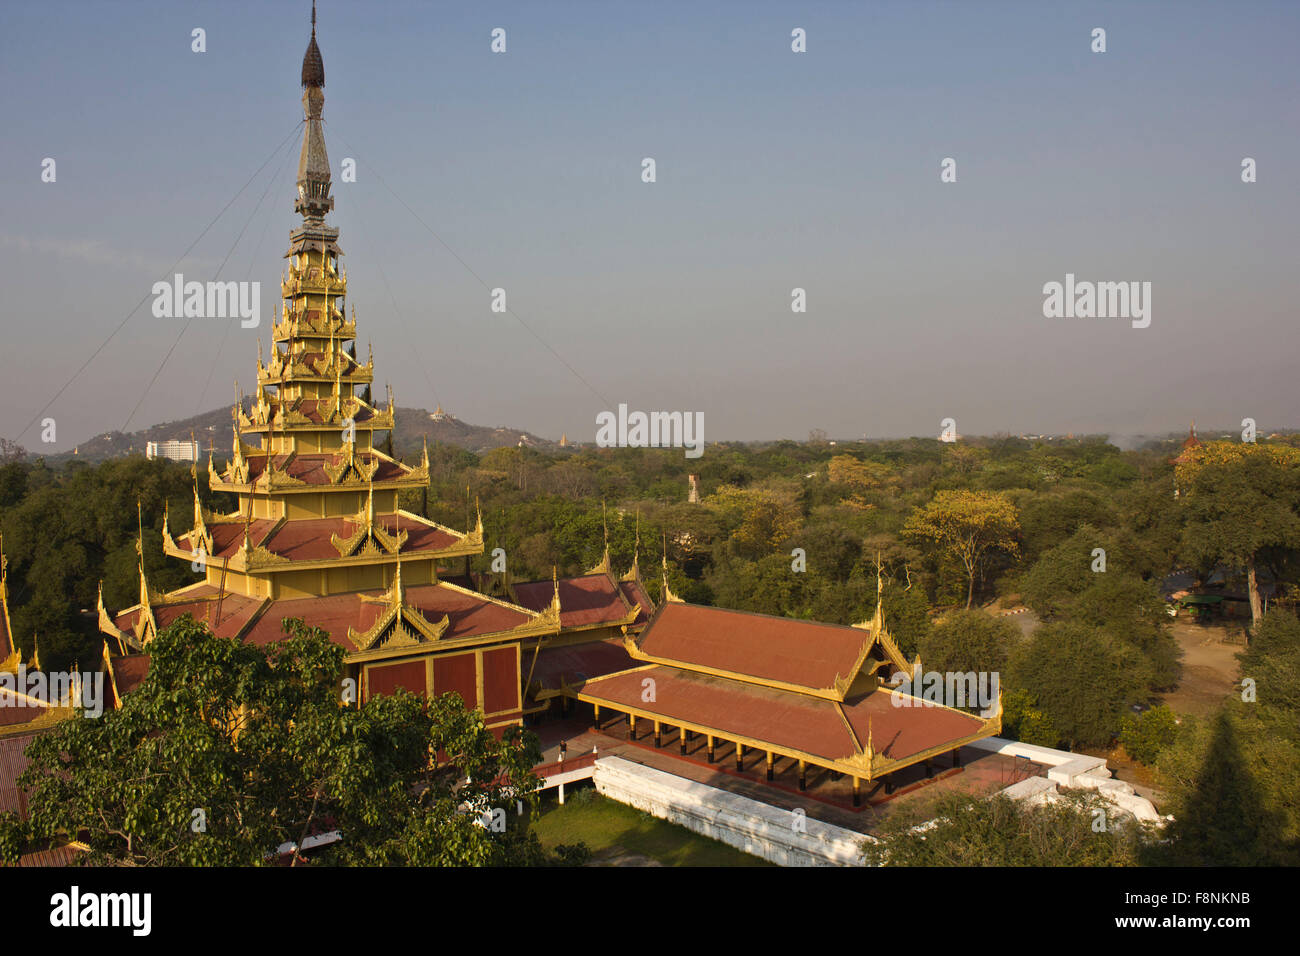 The Mandalay Palace, located in Mandalay, Myanmar, is the last royal palace of the last Burmese monarchy. Stock Photo